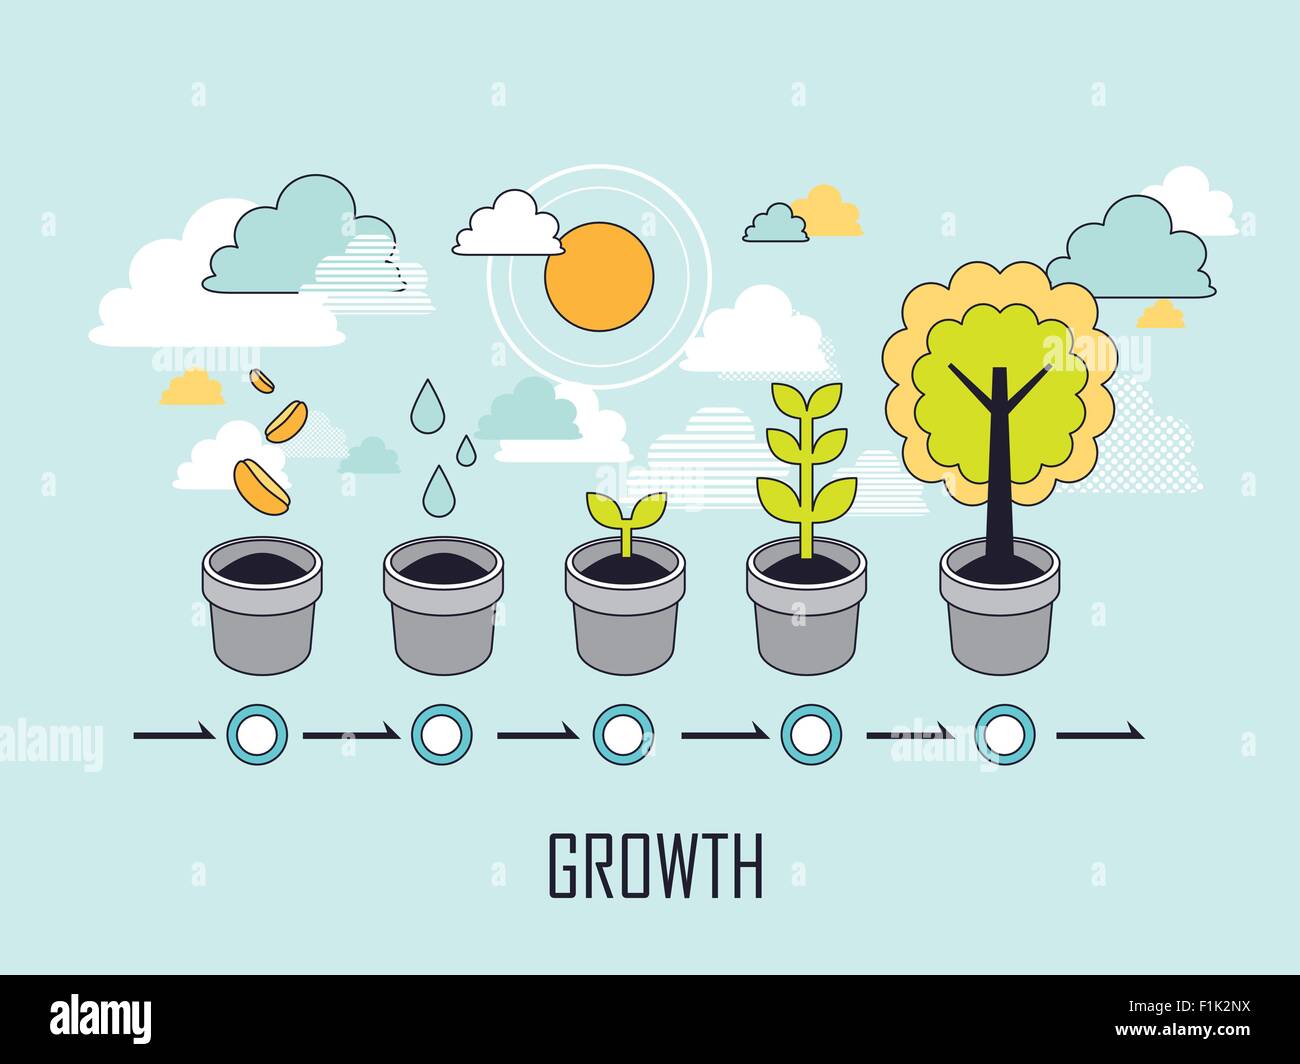 growth concept: the growing process of a tree in line style Stock Vector